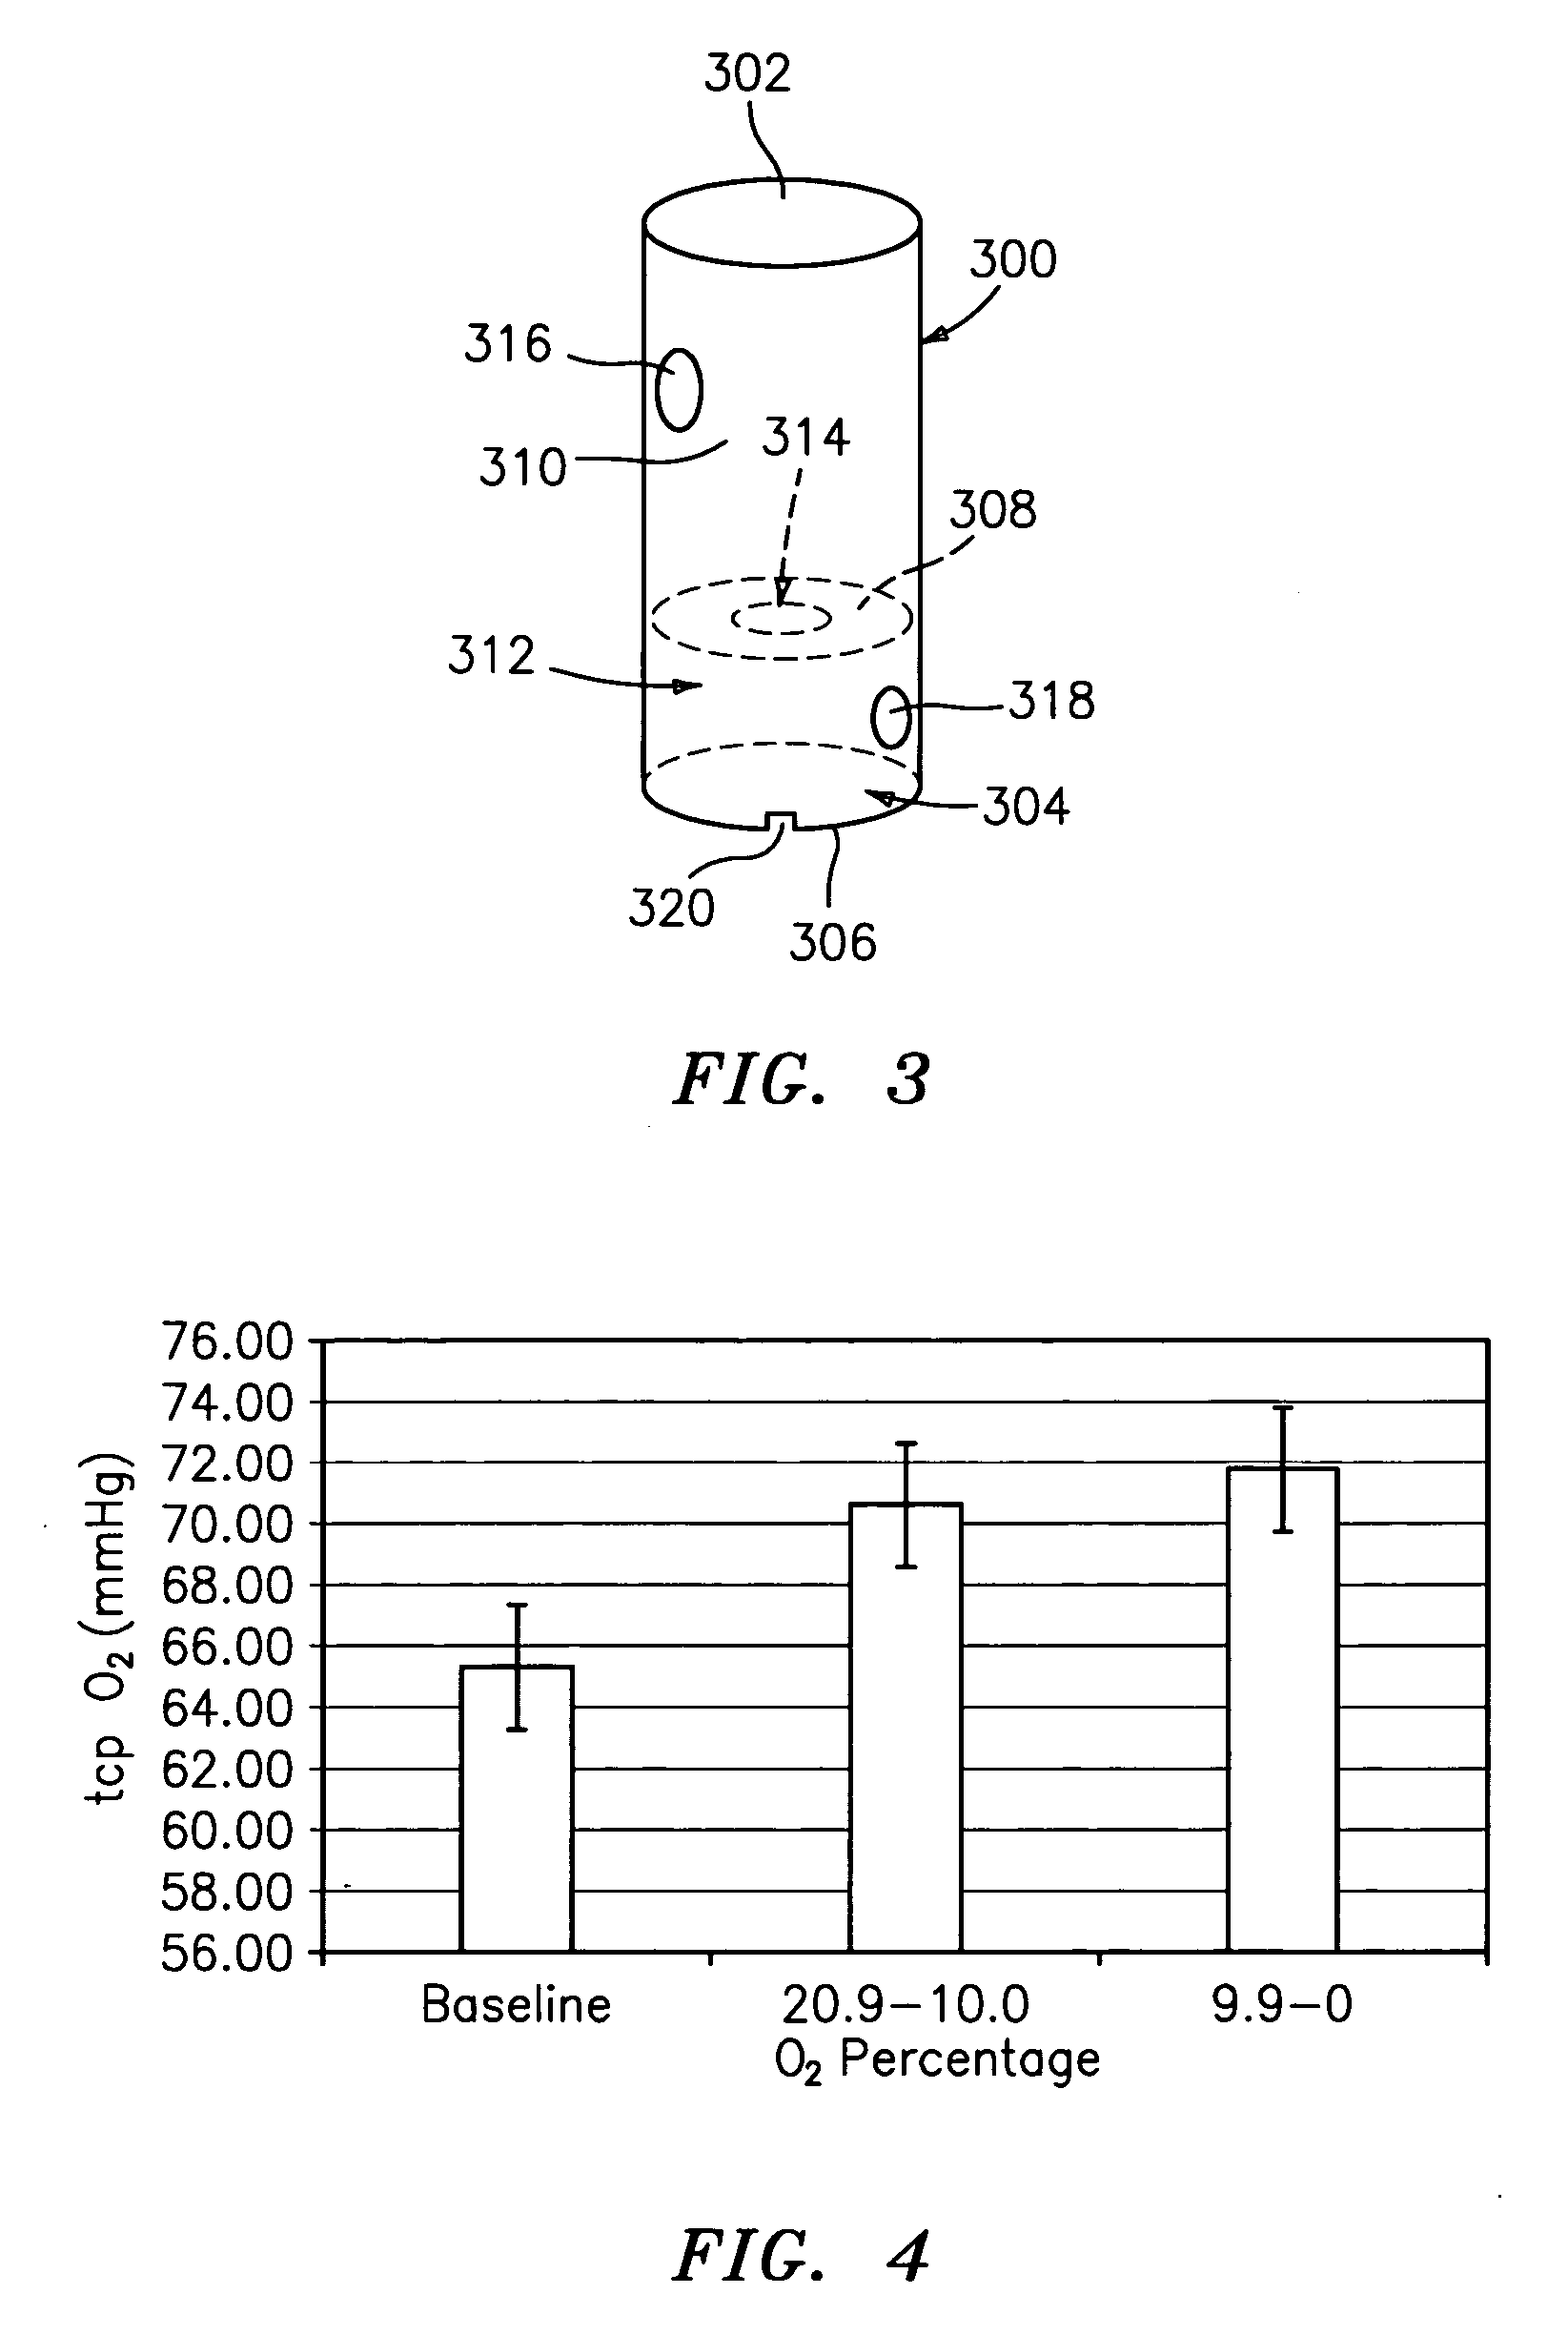 Method and apparatus for tissue oxygenation